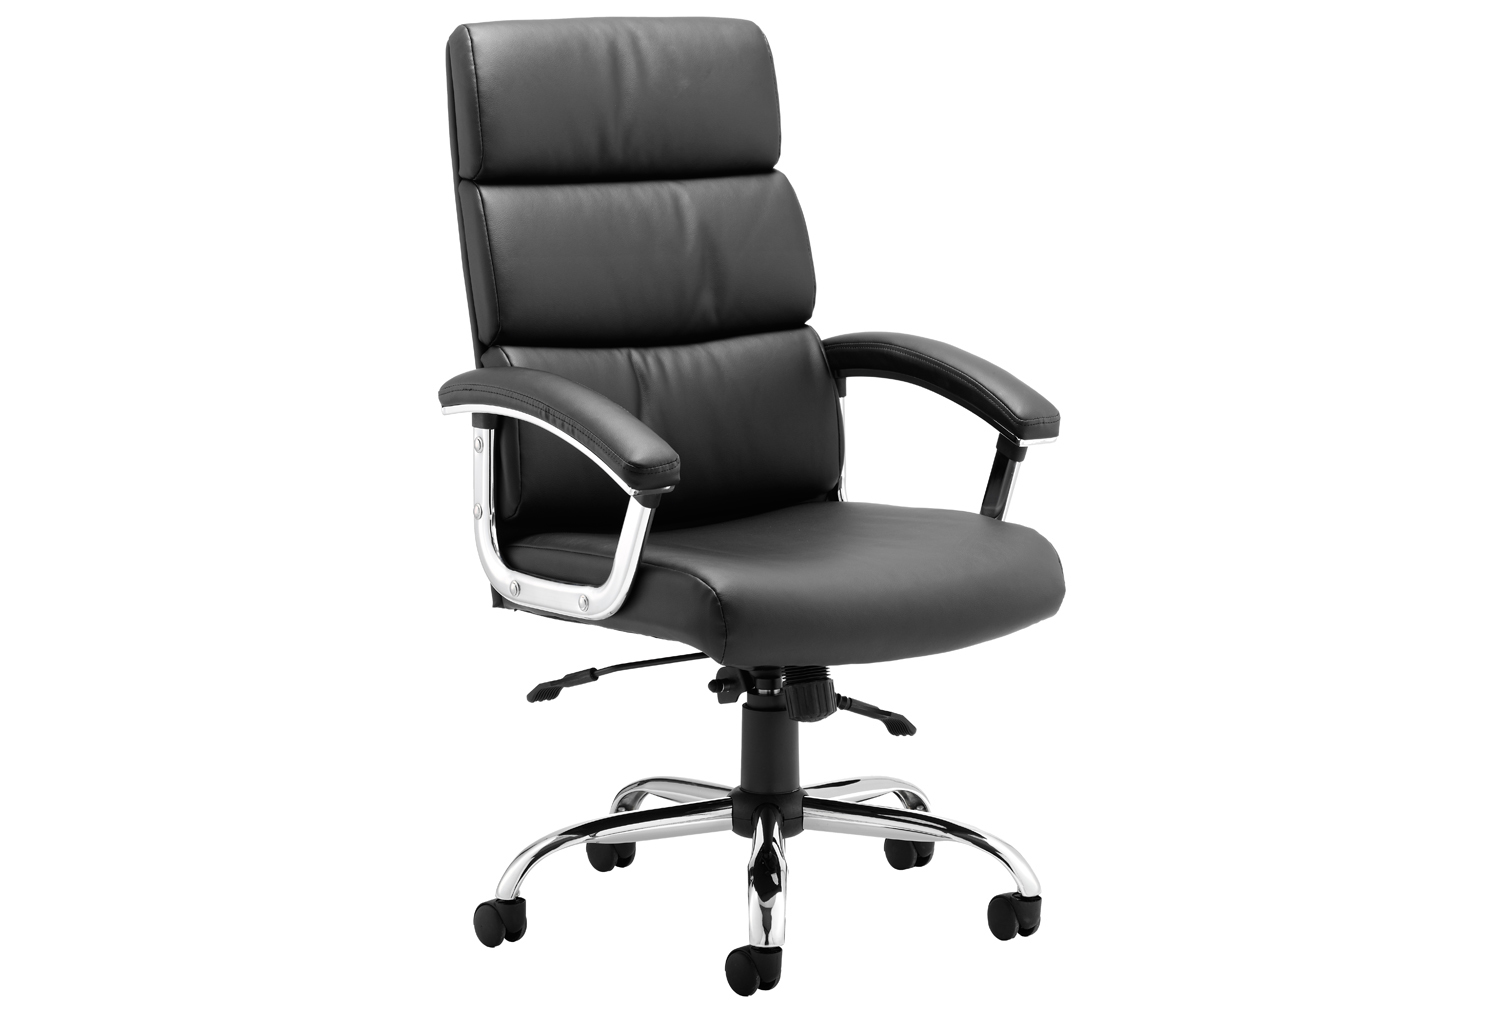 Crave High Back Black Bonded Leather Executive Office Chair, Black, Express Delivery